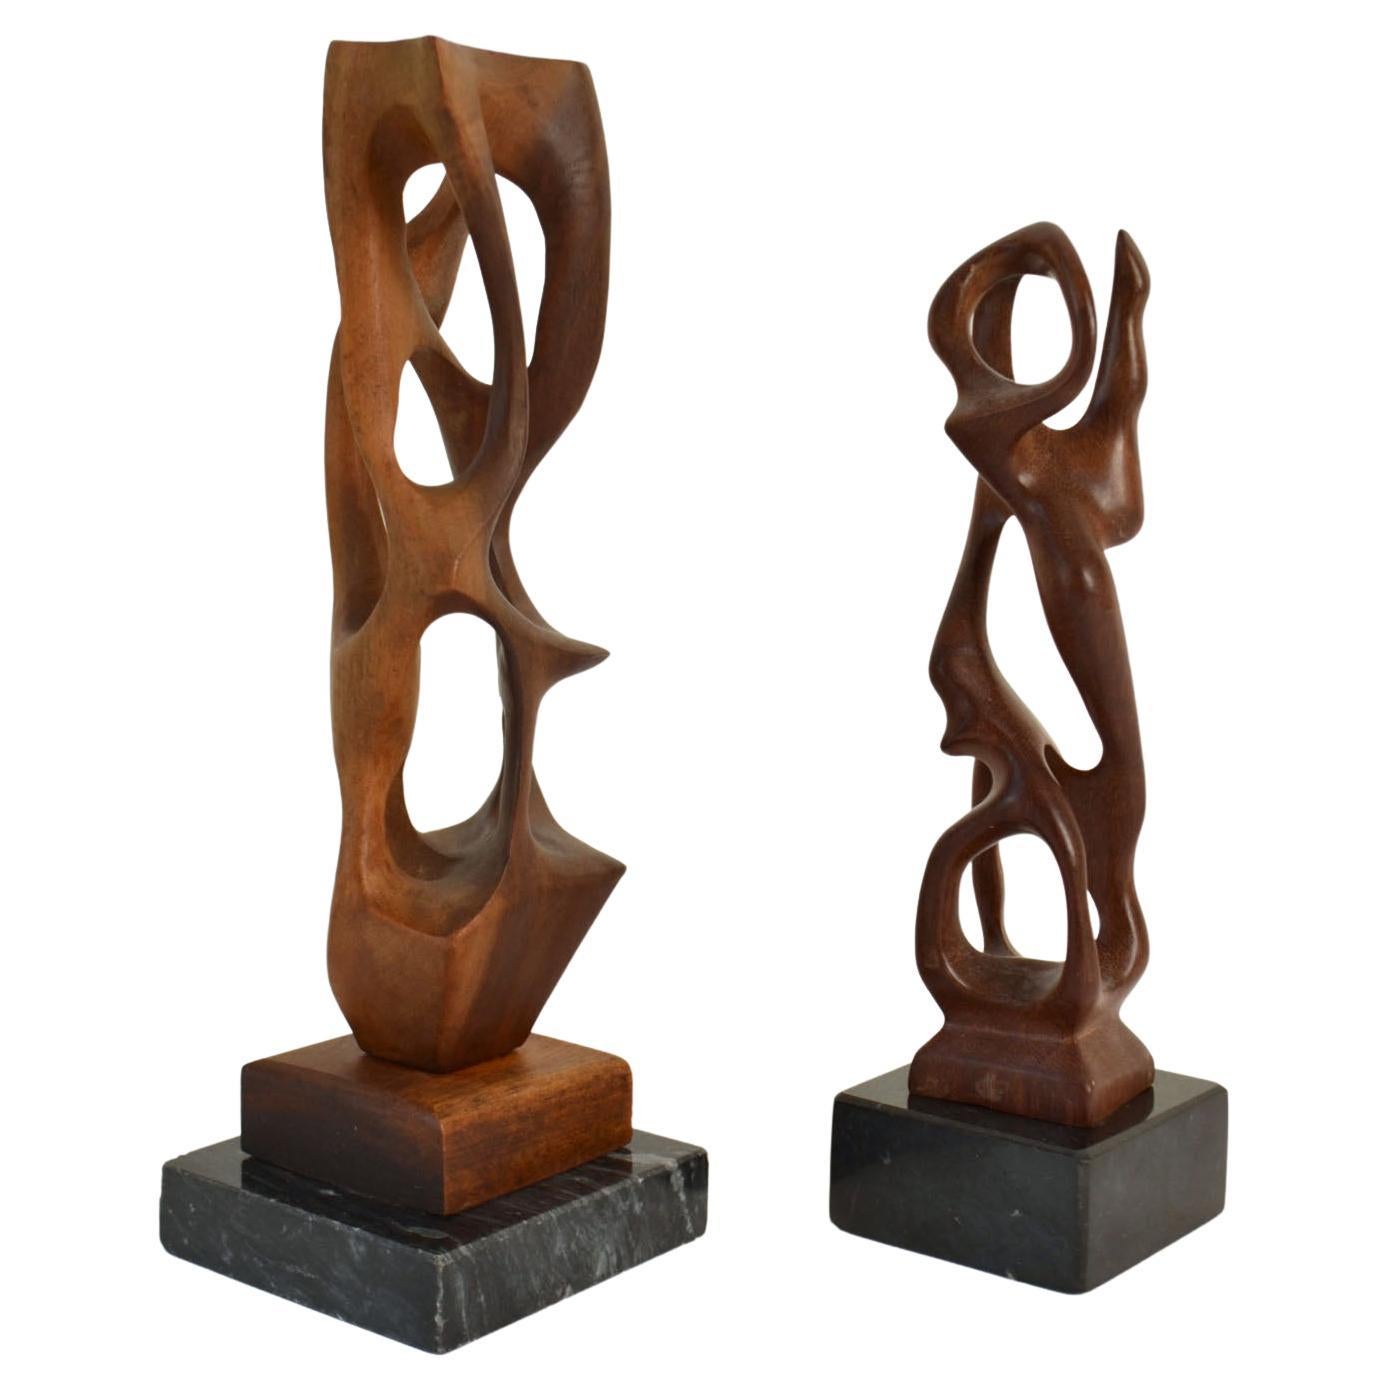 Hand Carved Biomorphic Wooden Sculptures